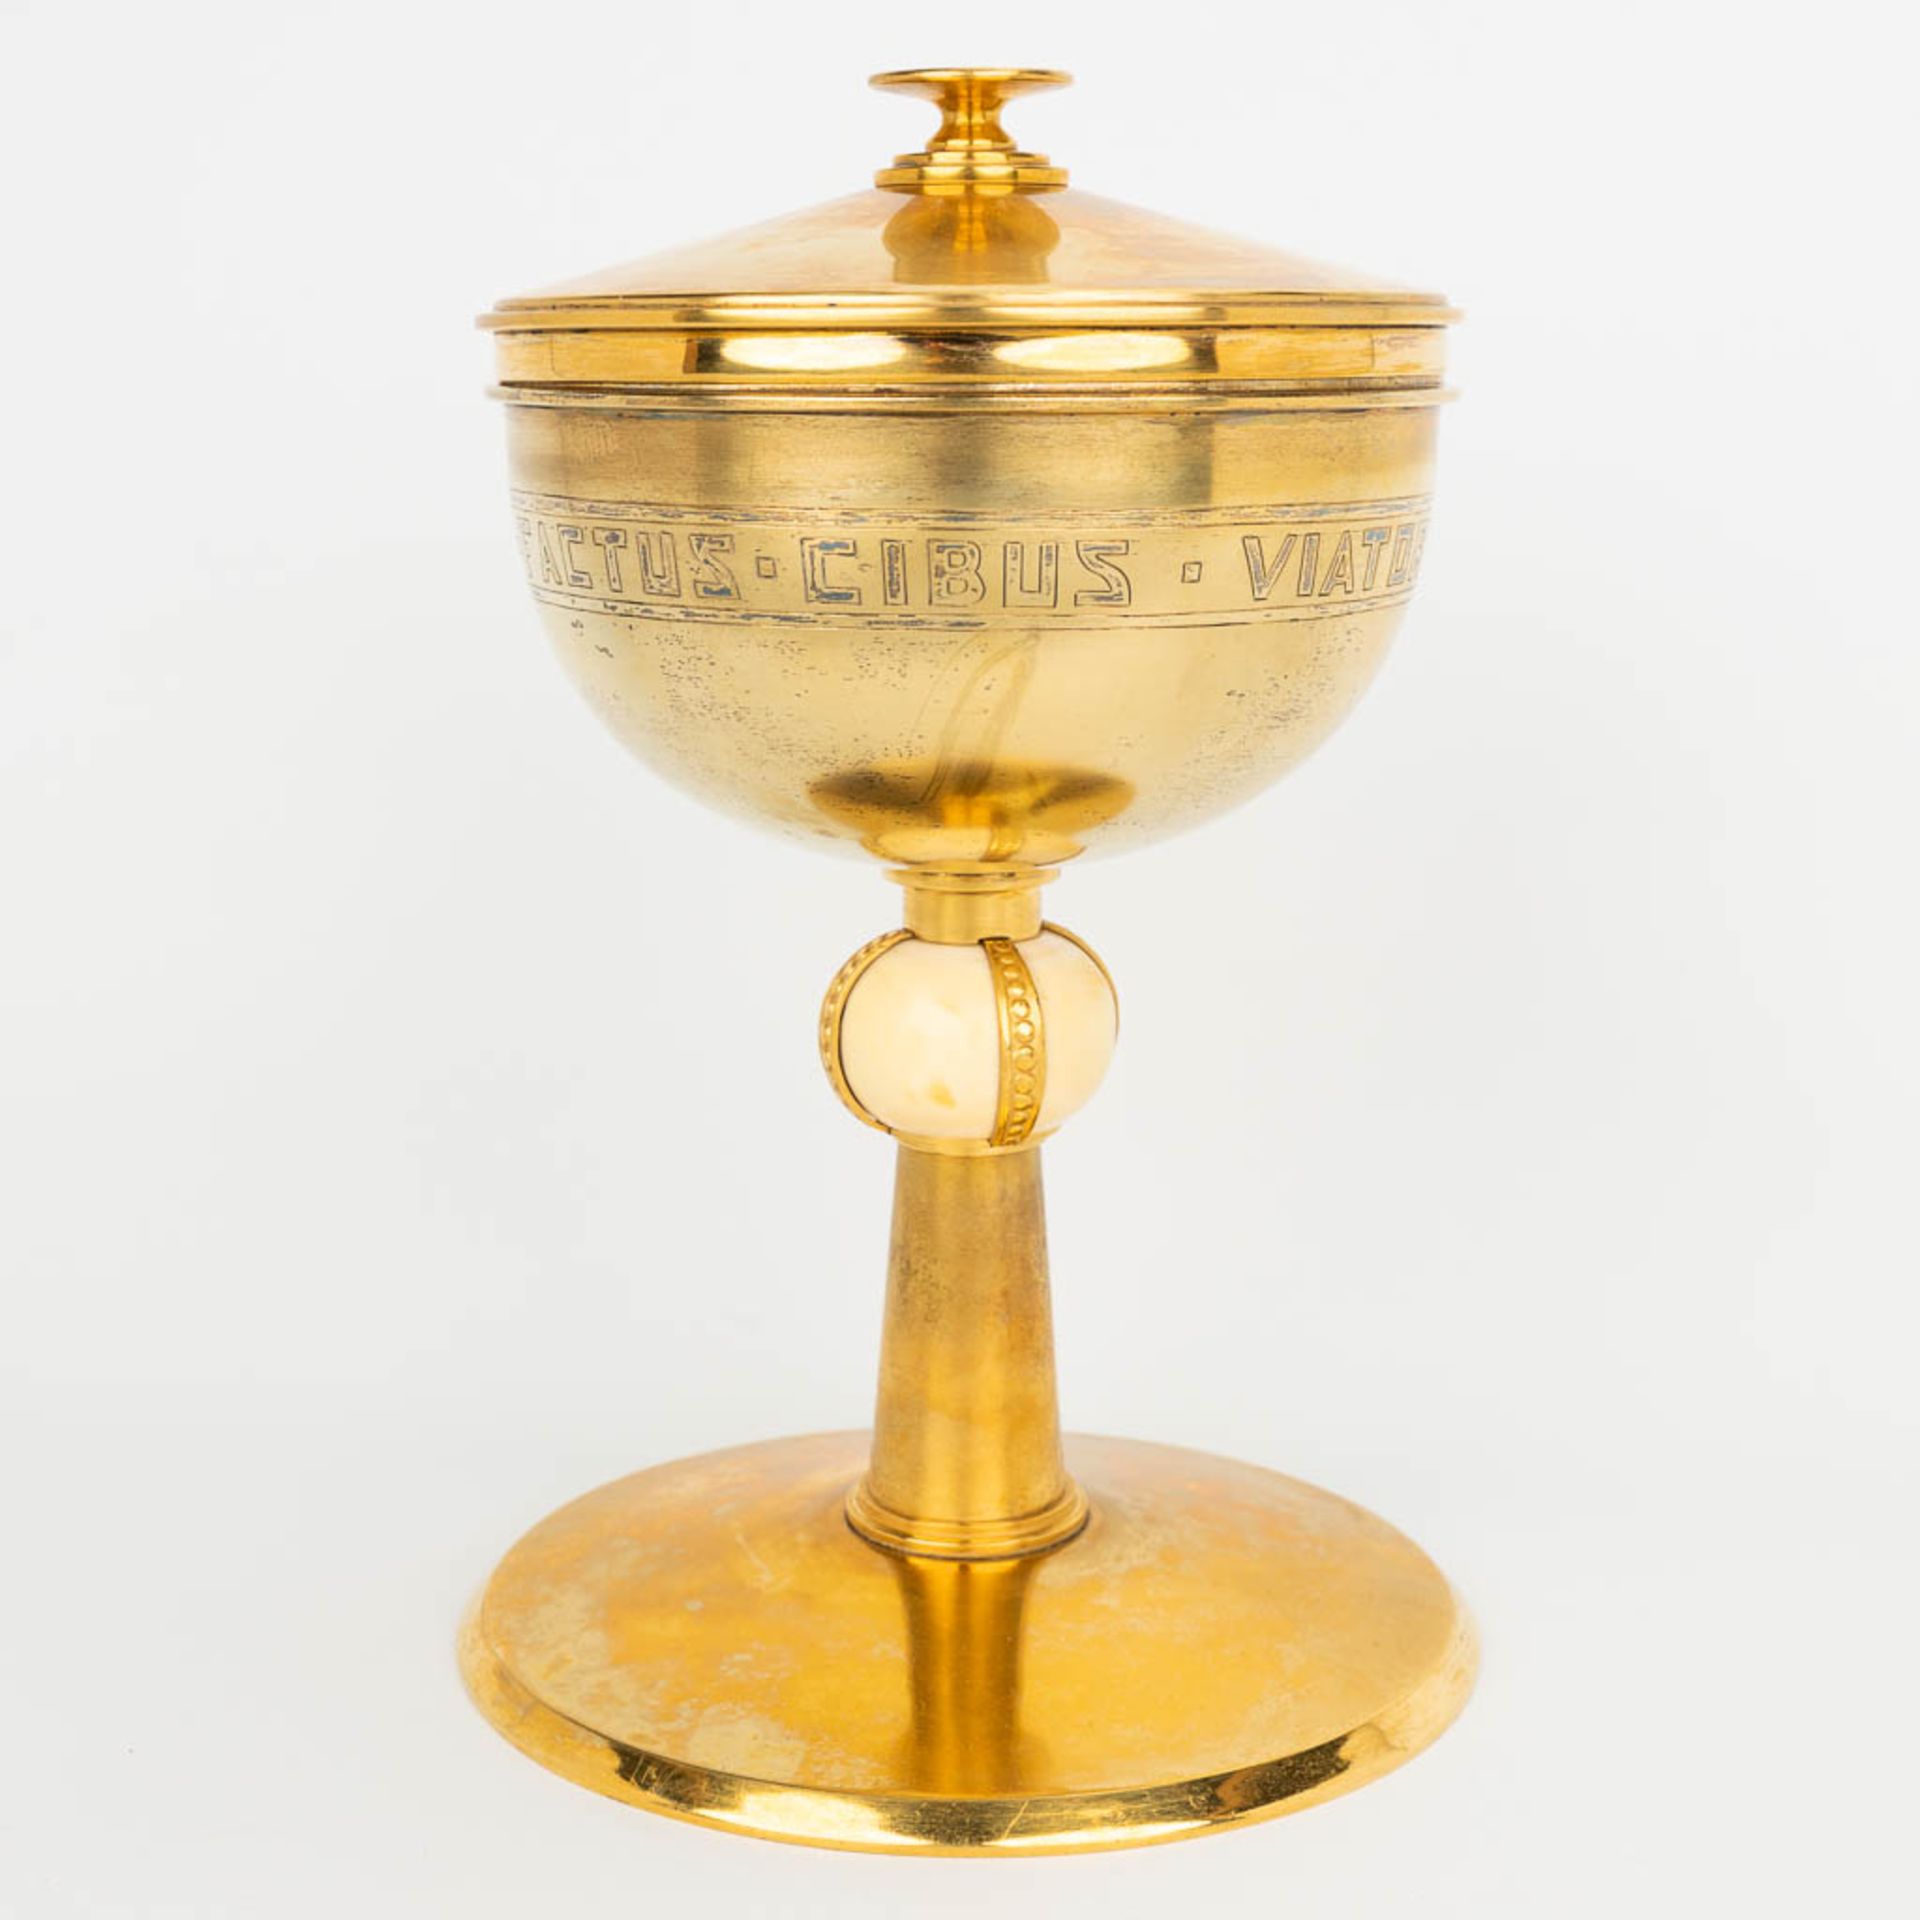 An art deco ciboria 'Viatorum Ecce Panis' and made of gold-plated silver. (H:25cm) - Image 11 of 12